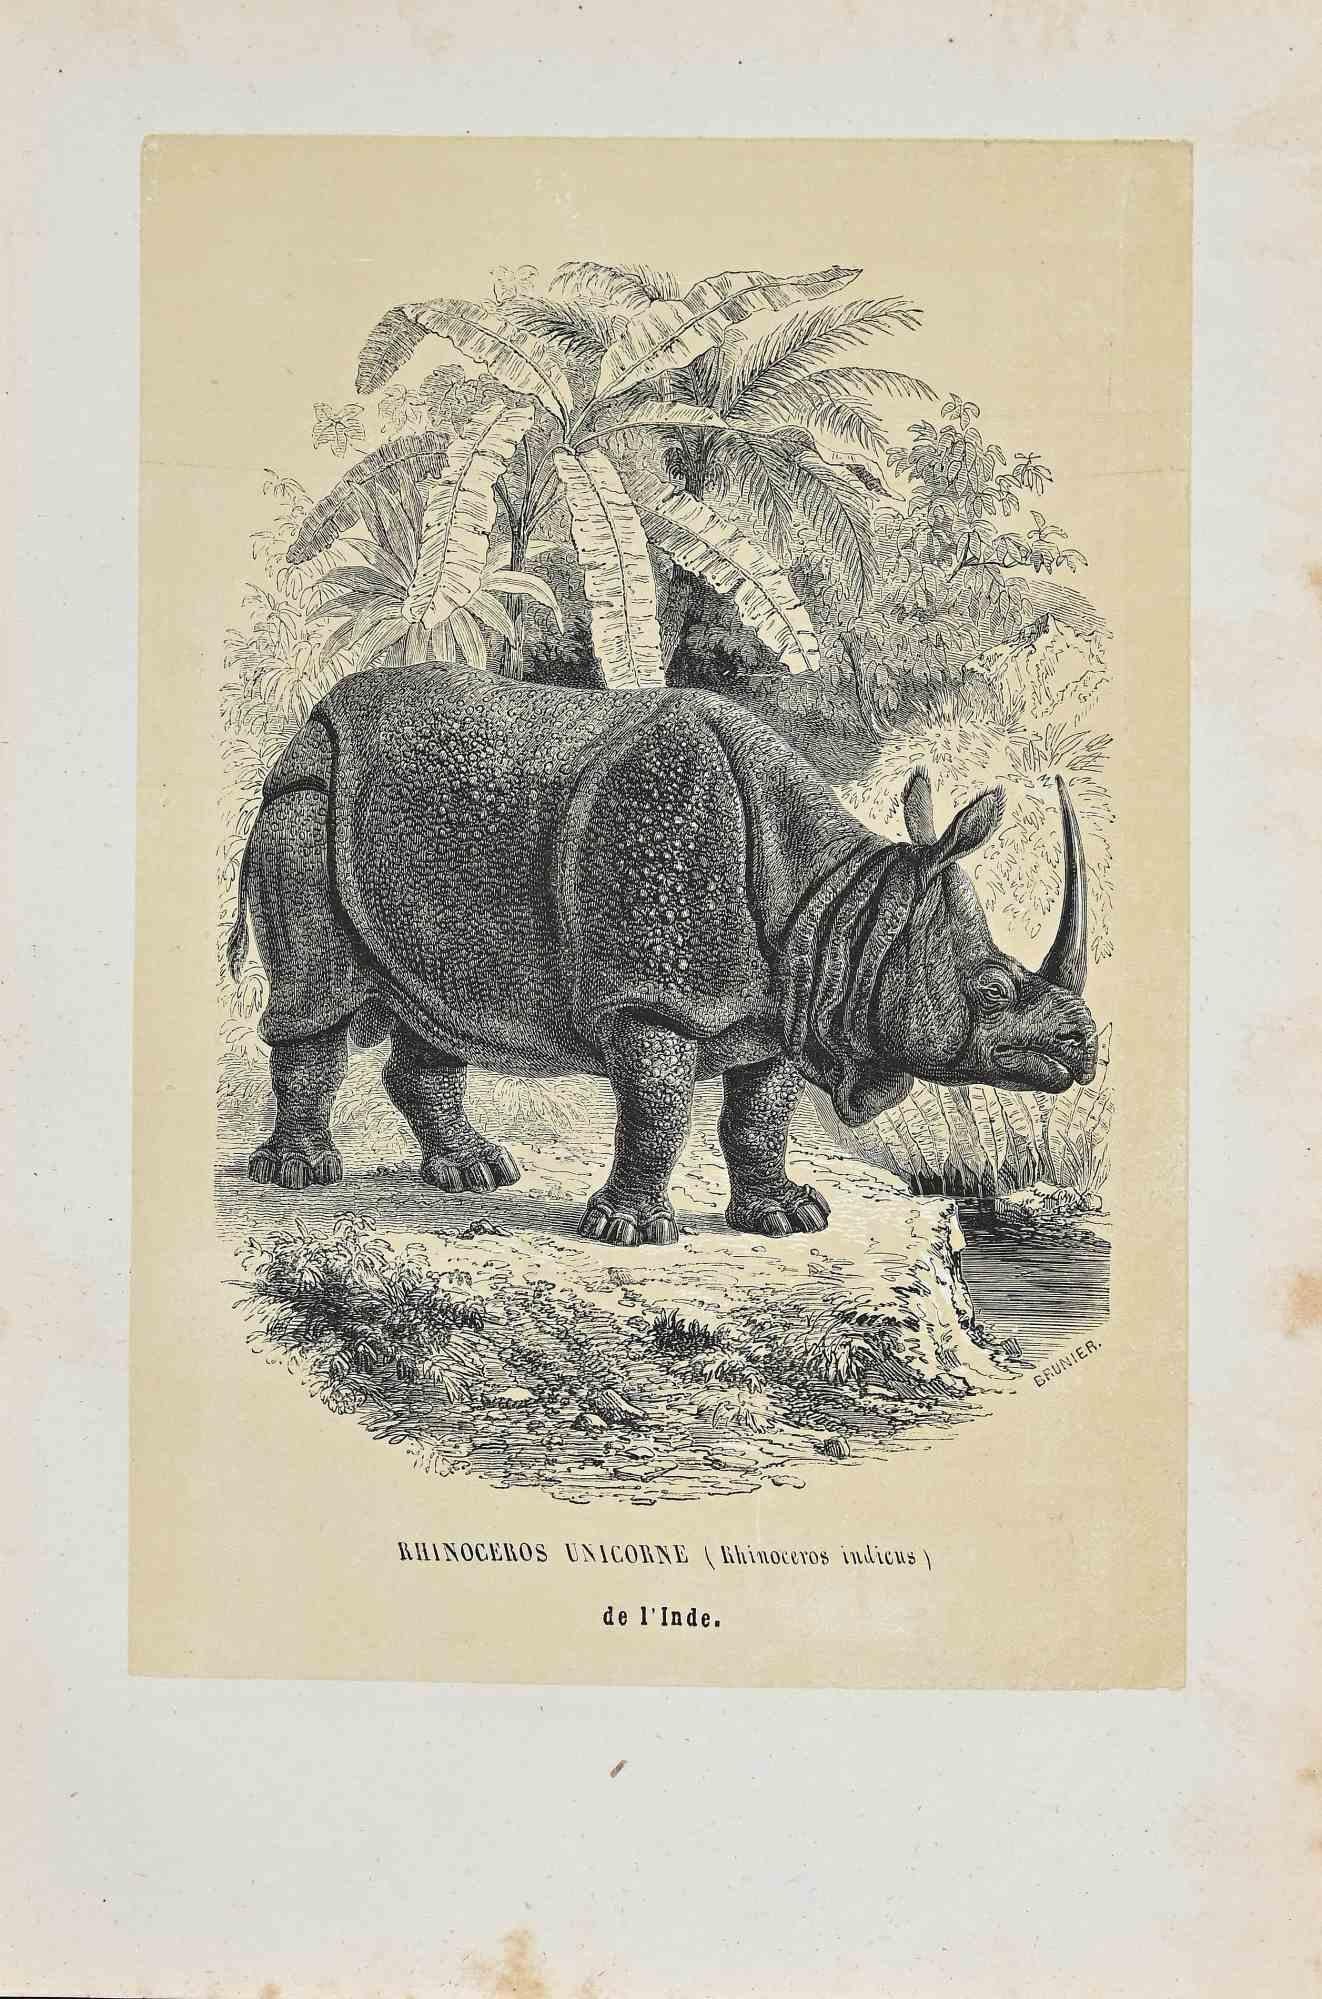 Hippopotamus Unicorn is an original lithograph with stencil on ivory-colored paper, realized by Paul Gervais (1816-1879). The artwork is from The Series of "Les Trois Règnes de la Nature", and was published in 1854.

Good conditions.

Titled on the